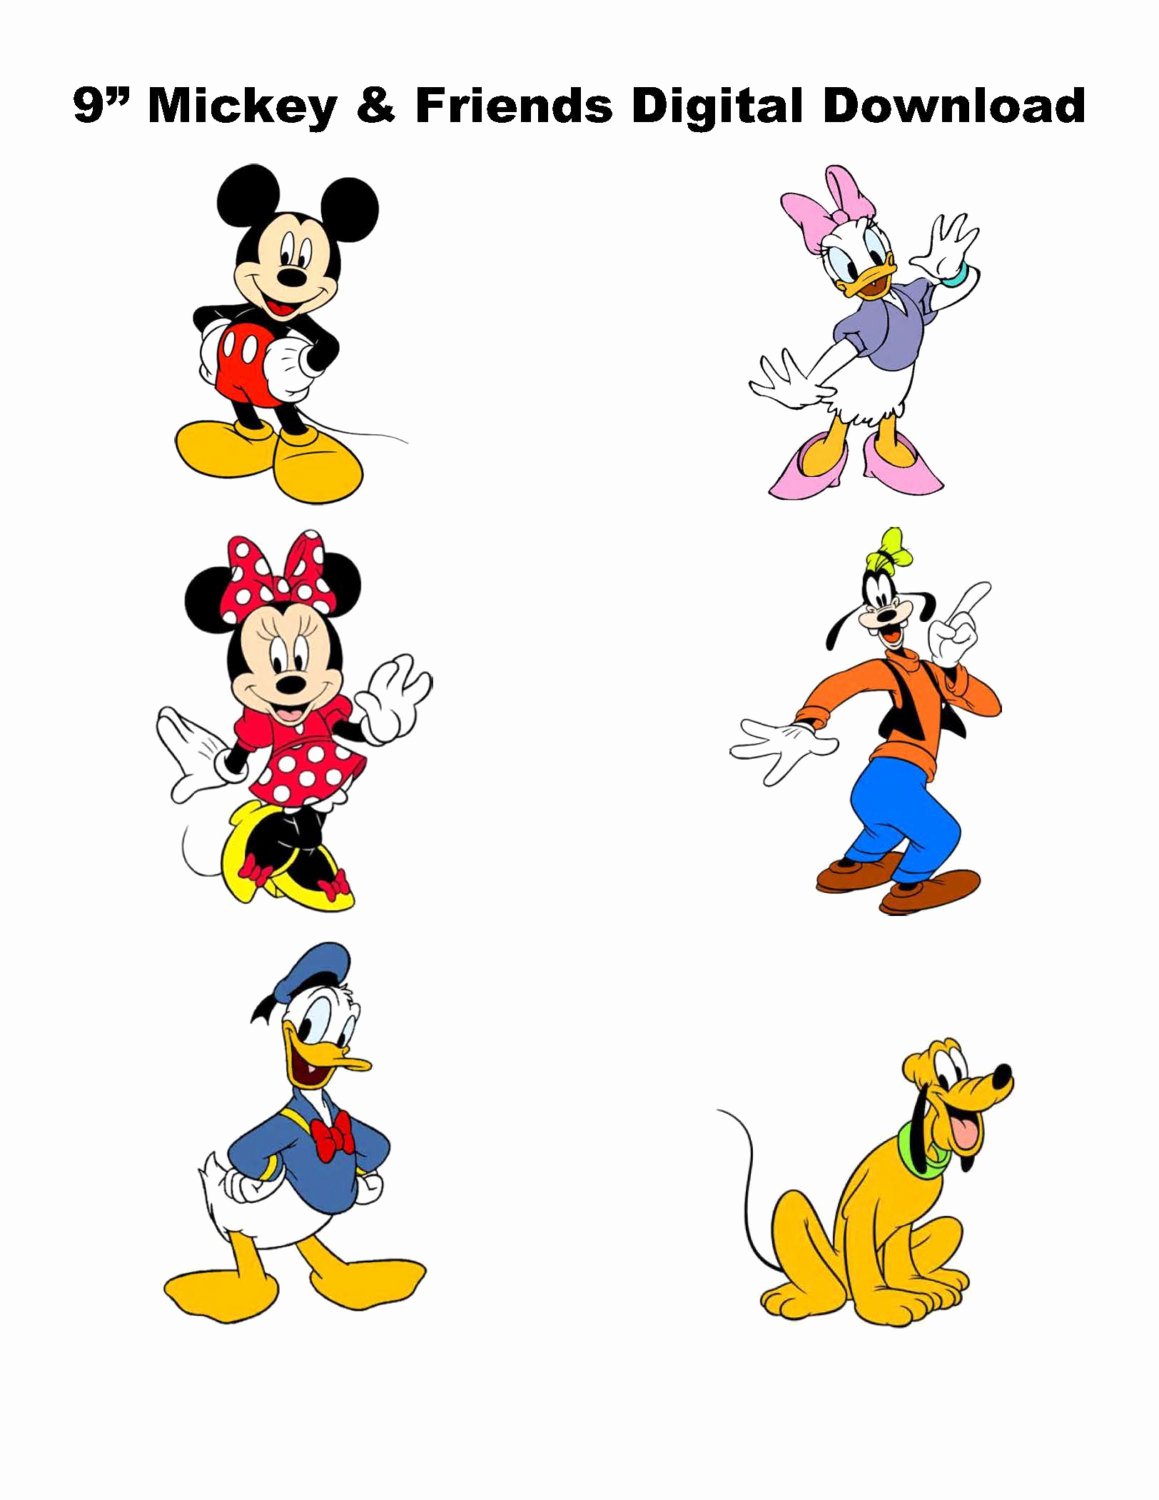 Mickey Mouse Cut Out Printable Luxury 9 Digital Mickey and Friends Centerpieces Large Size